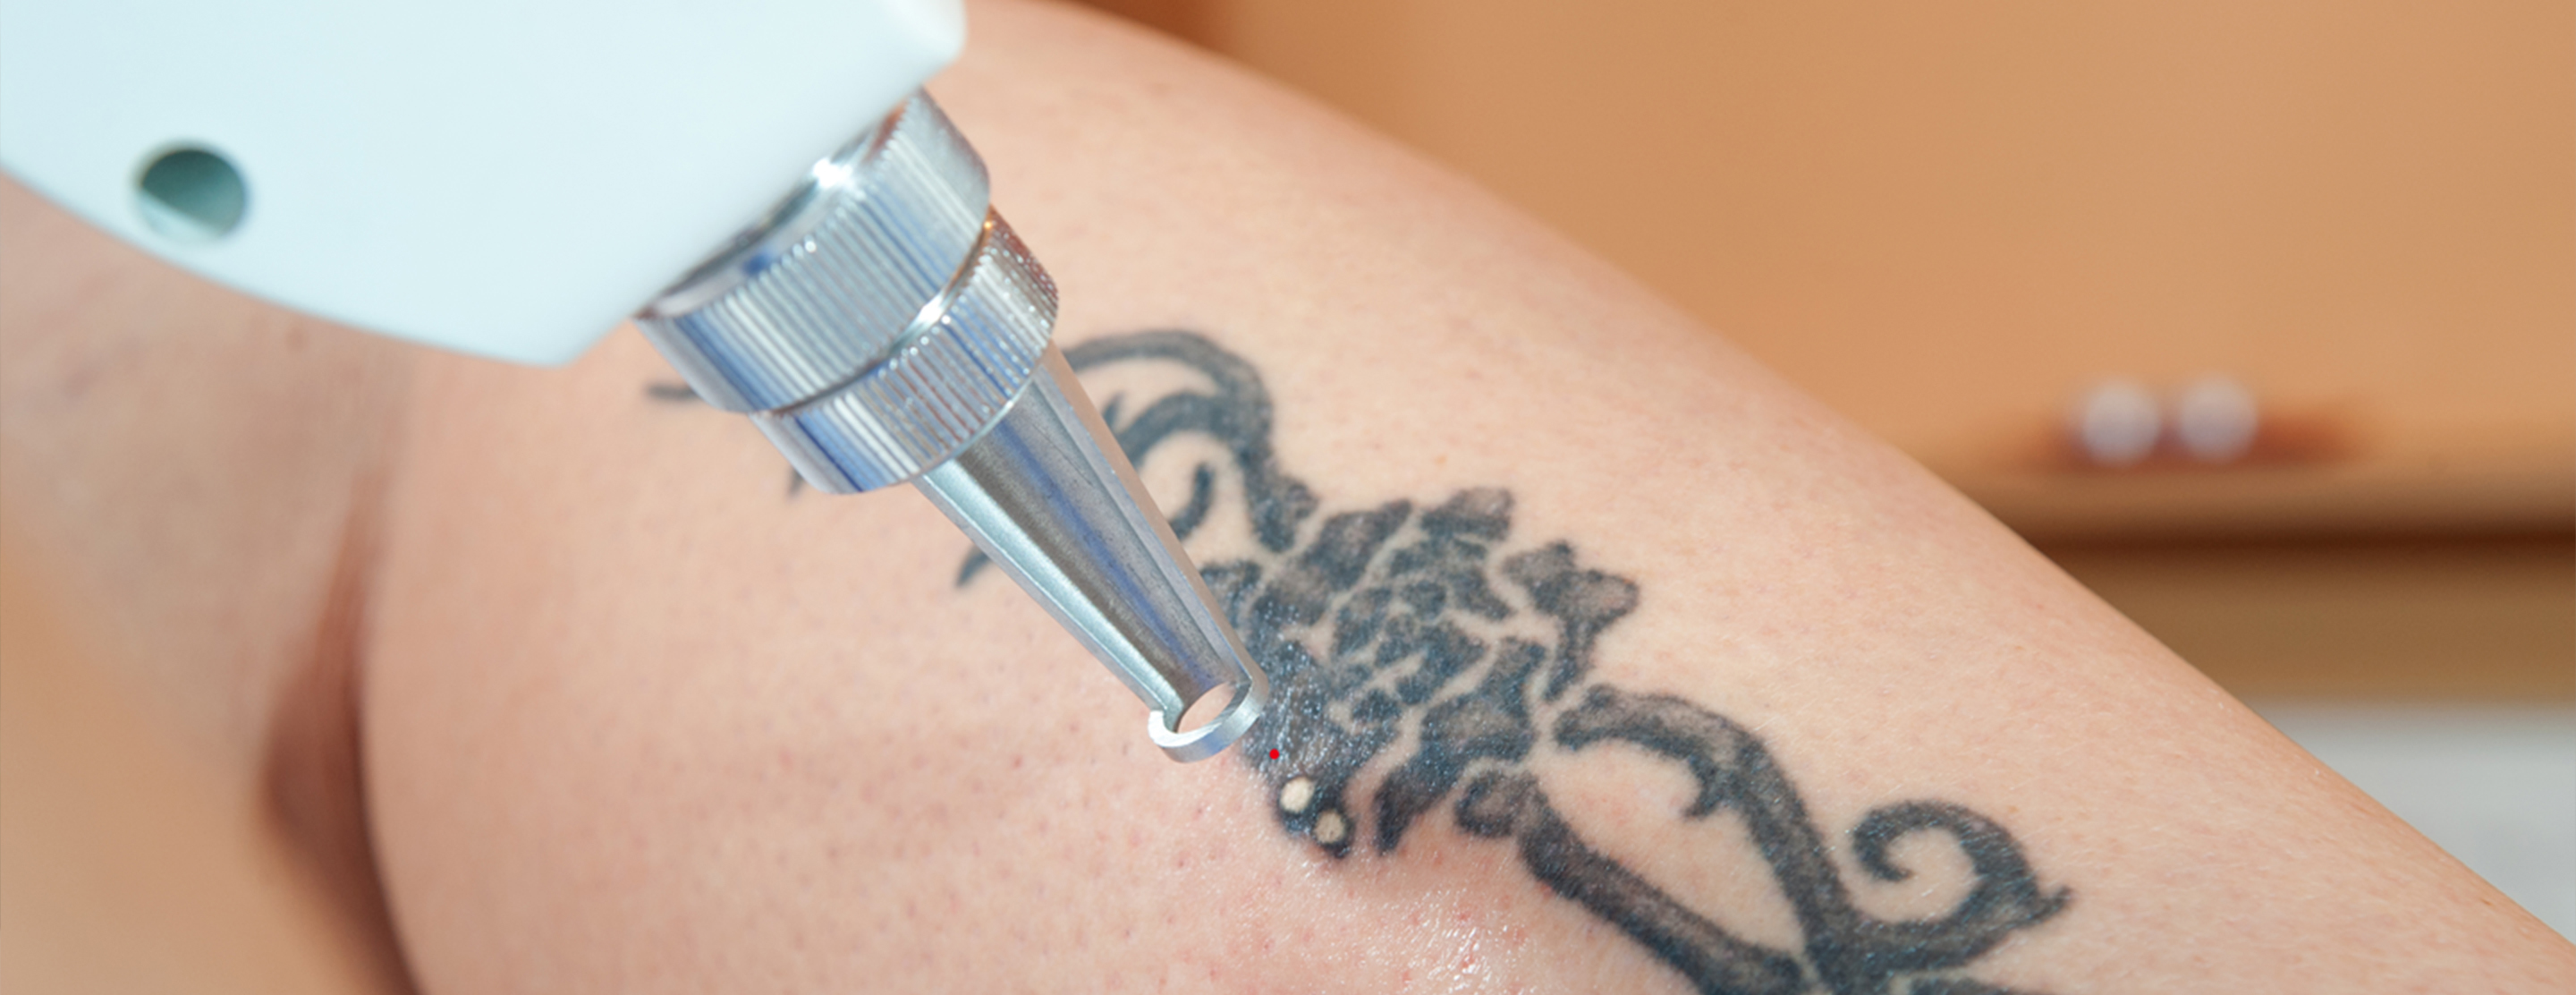 Laser Tattoo Removal Conditions And Treatments Ucsf Health 